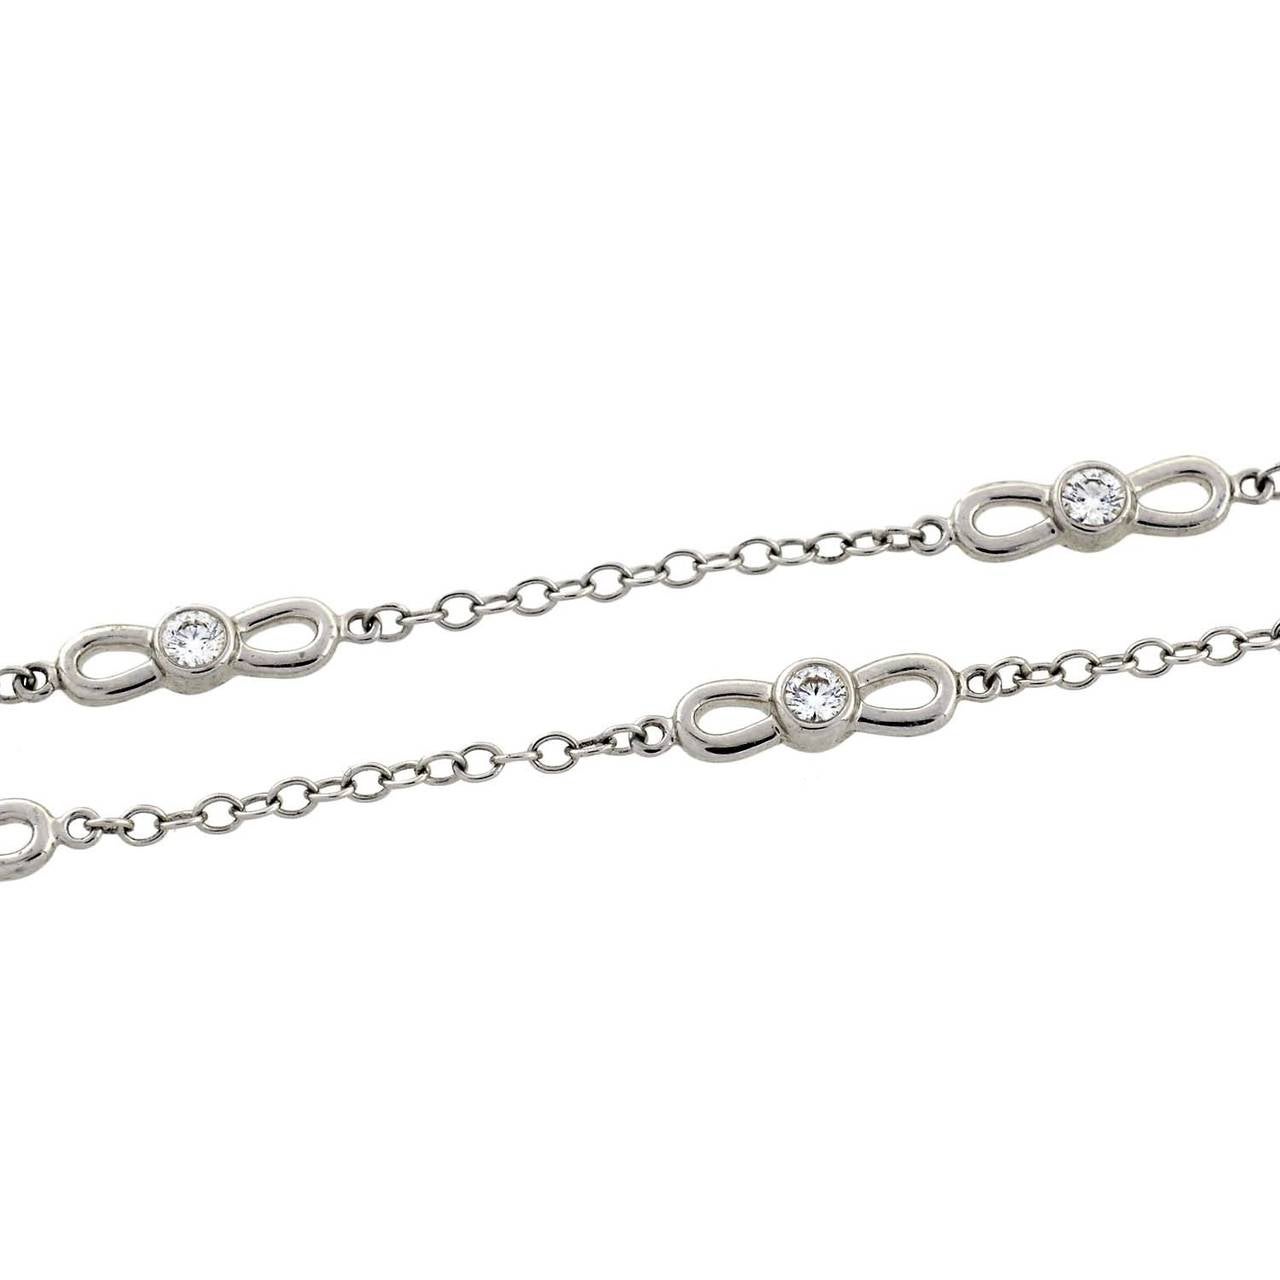 Women's Tiffany & Co. Diamond Gold Link Chain Necklace